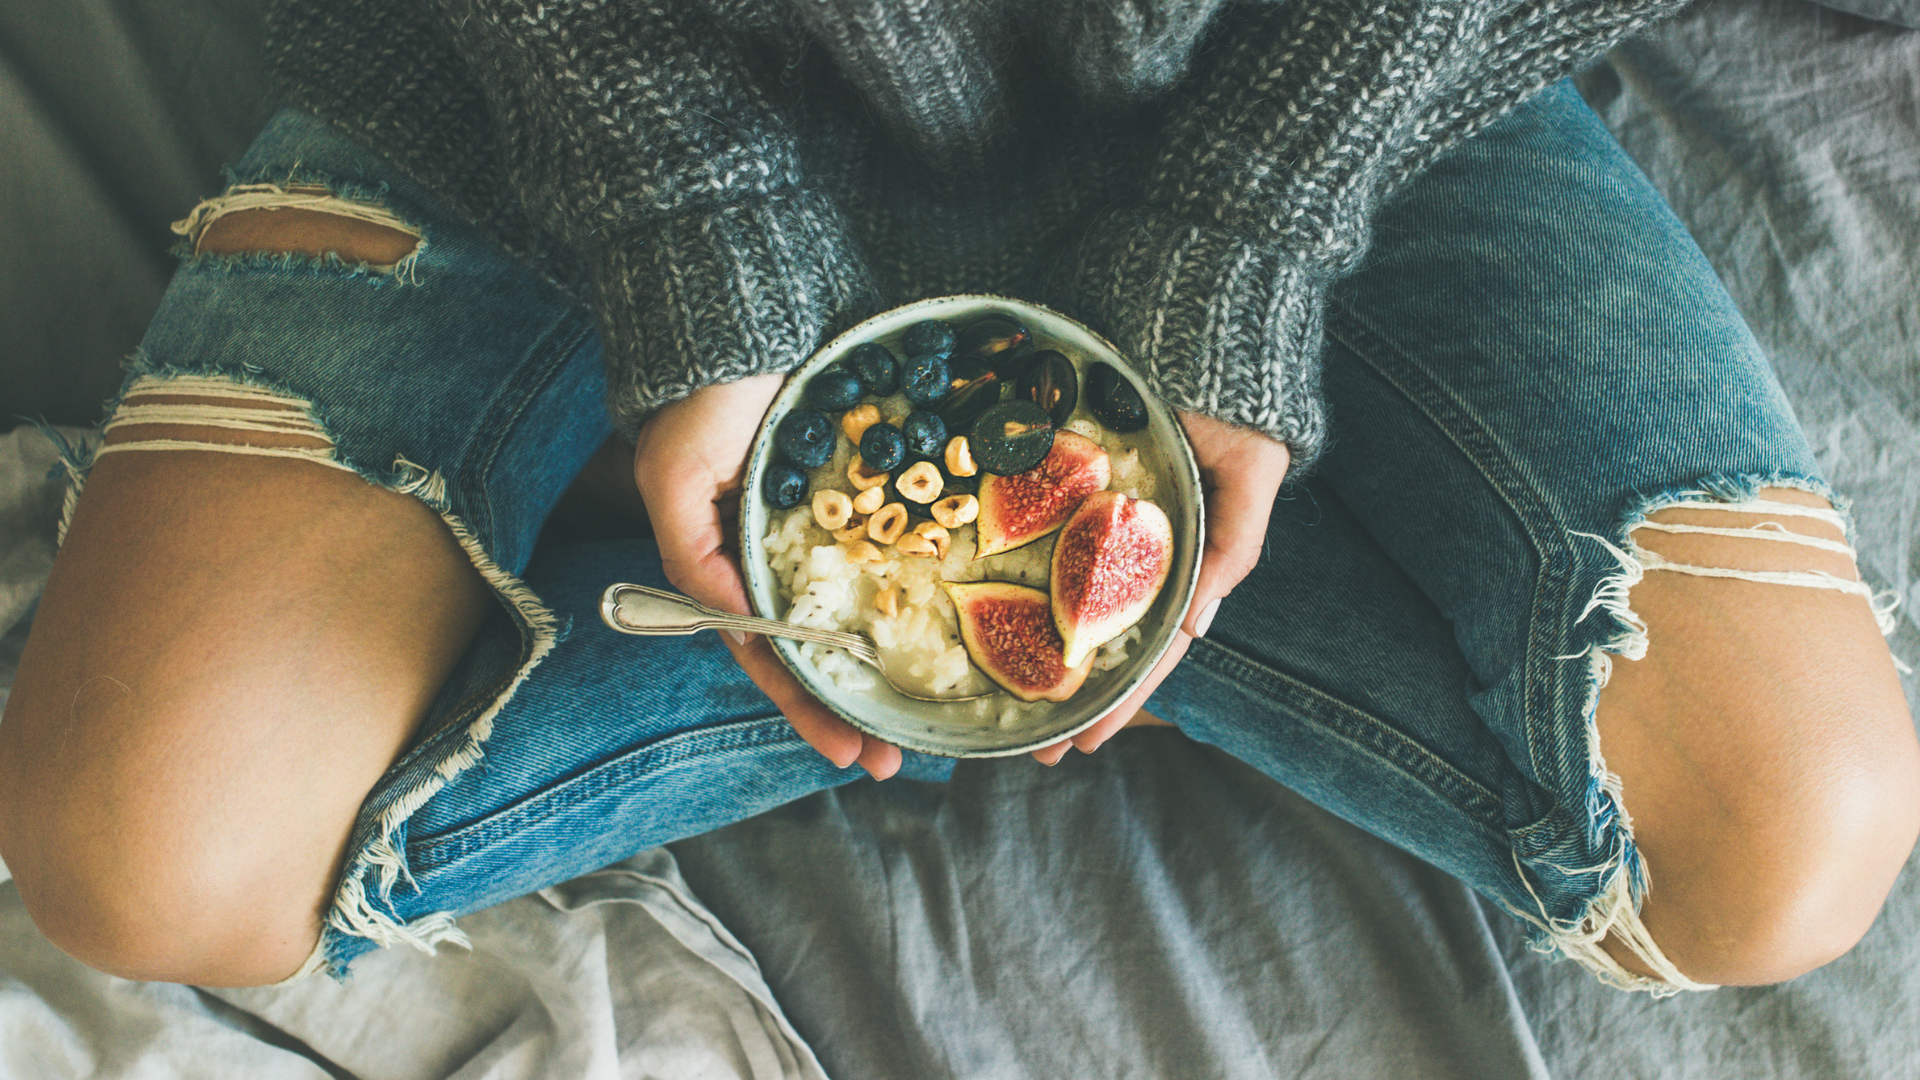 Healthy winter breakfast. Woman in sweater and jeans holding rice porridge with figs, berries, hazelnuts. Clean eating concept for healthy muscles and bones.